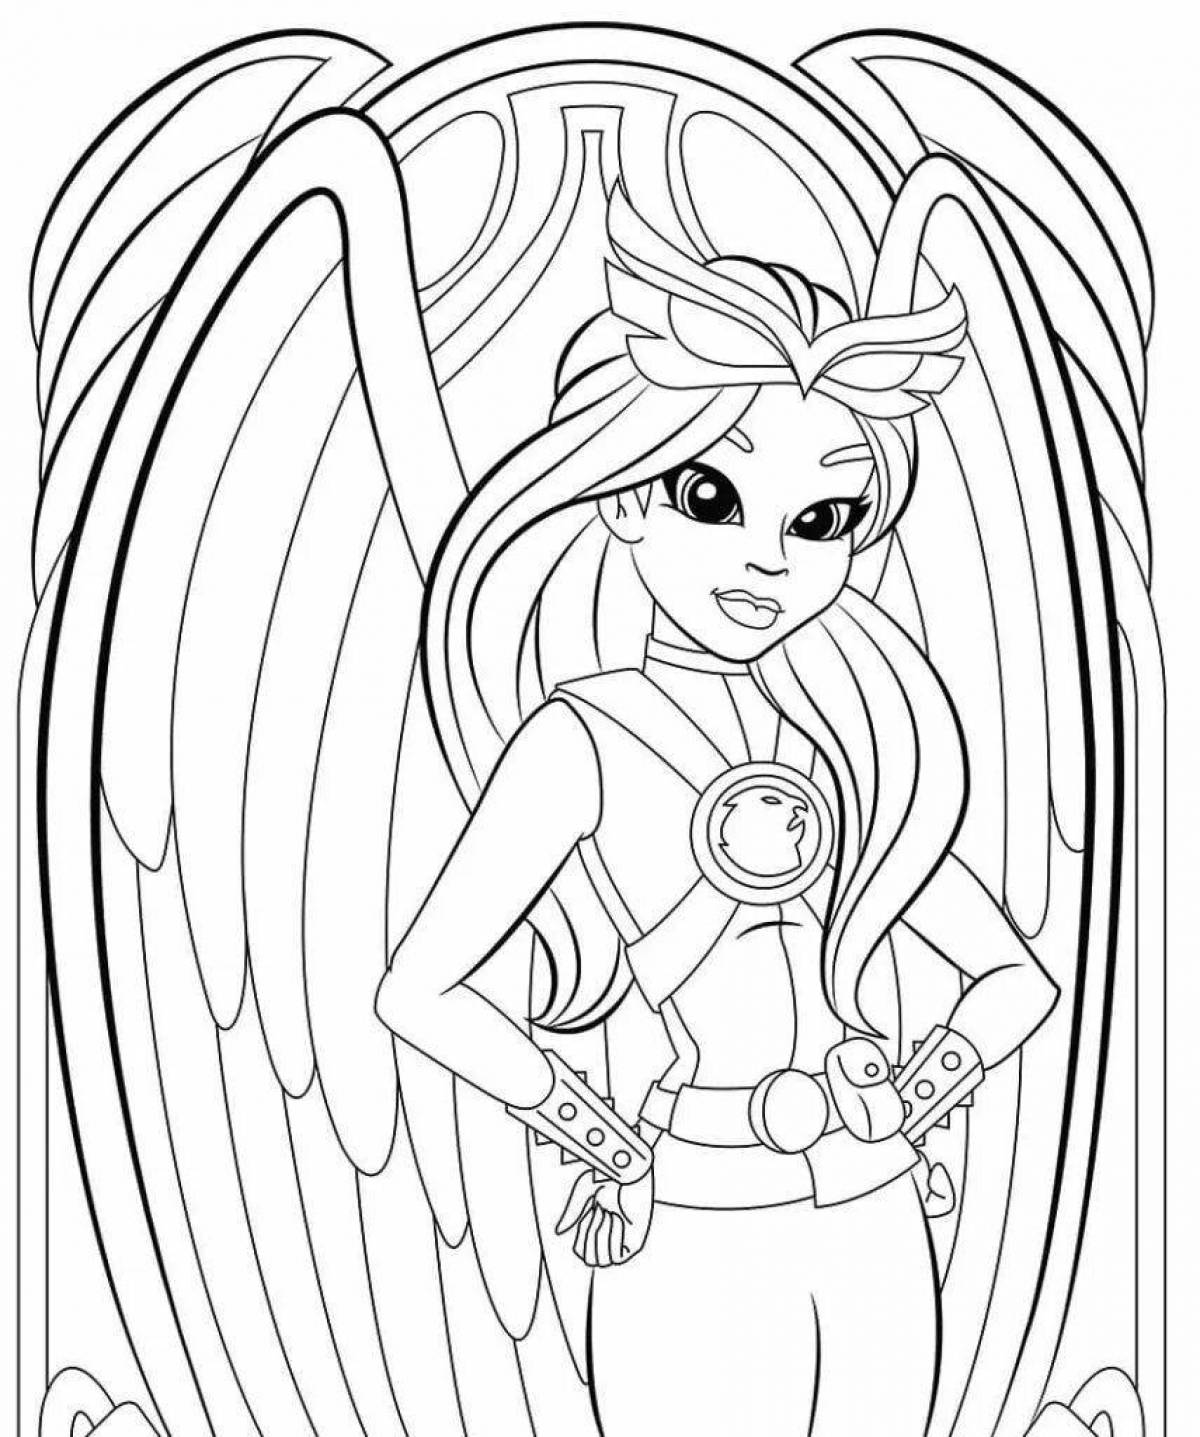 Colorful super girl coloring page